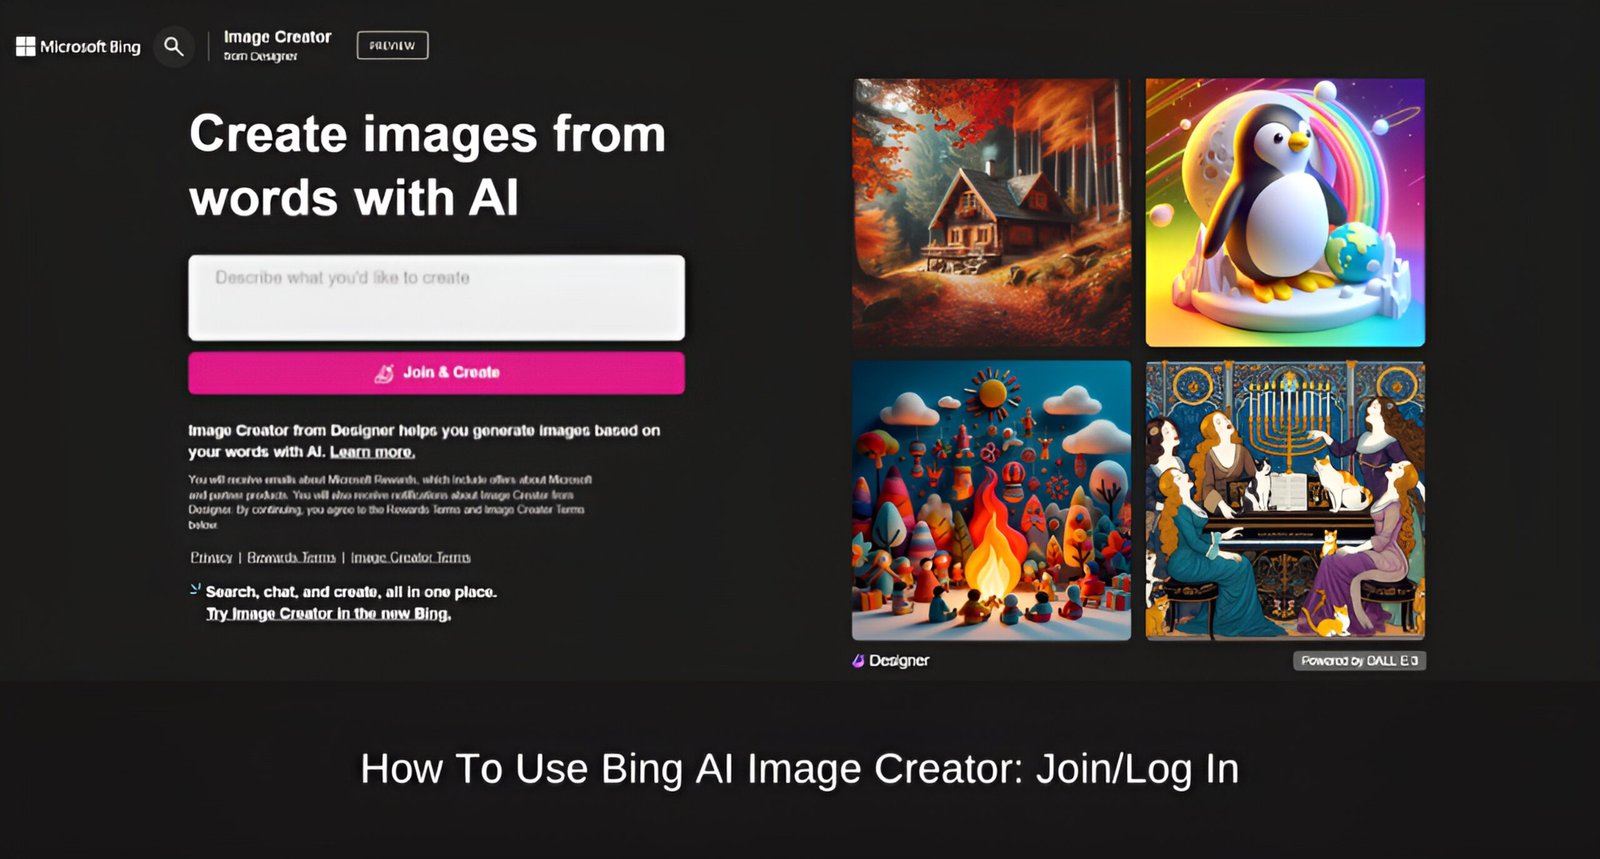 How To Use Bing AI Image Creator: Join/Log In
